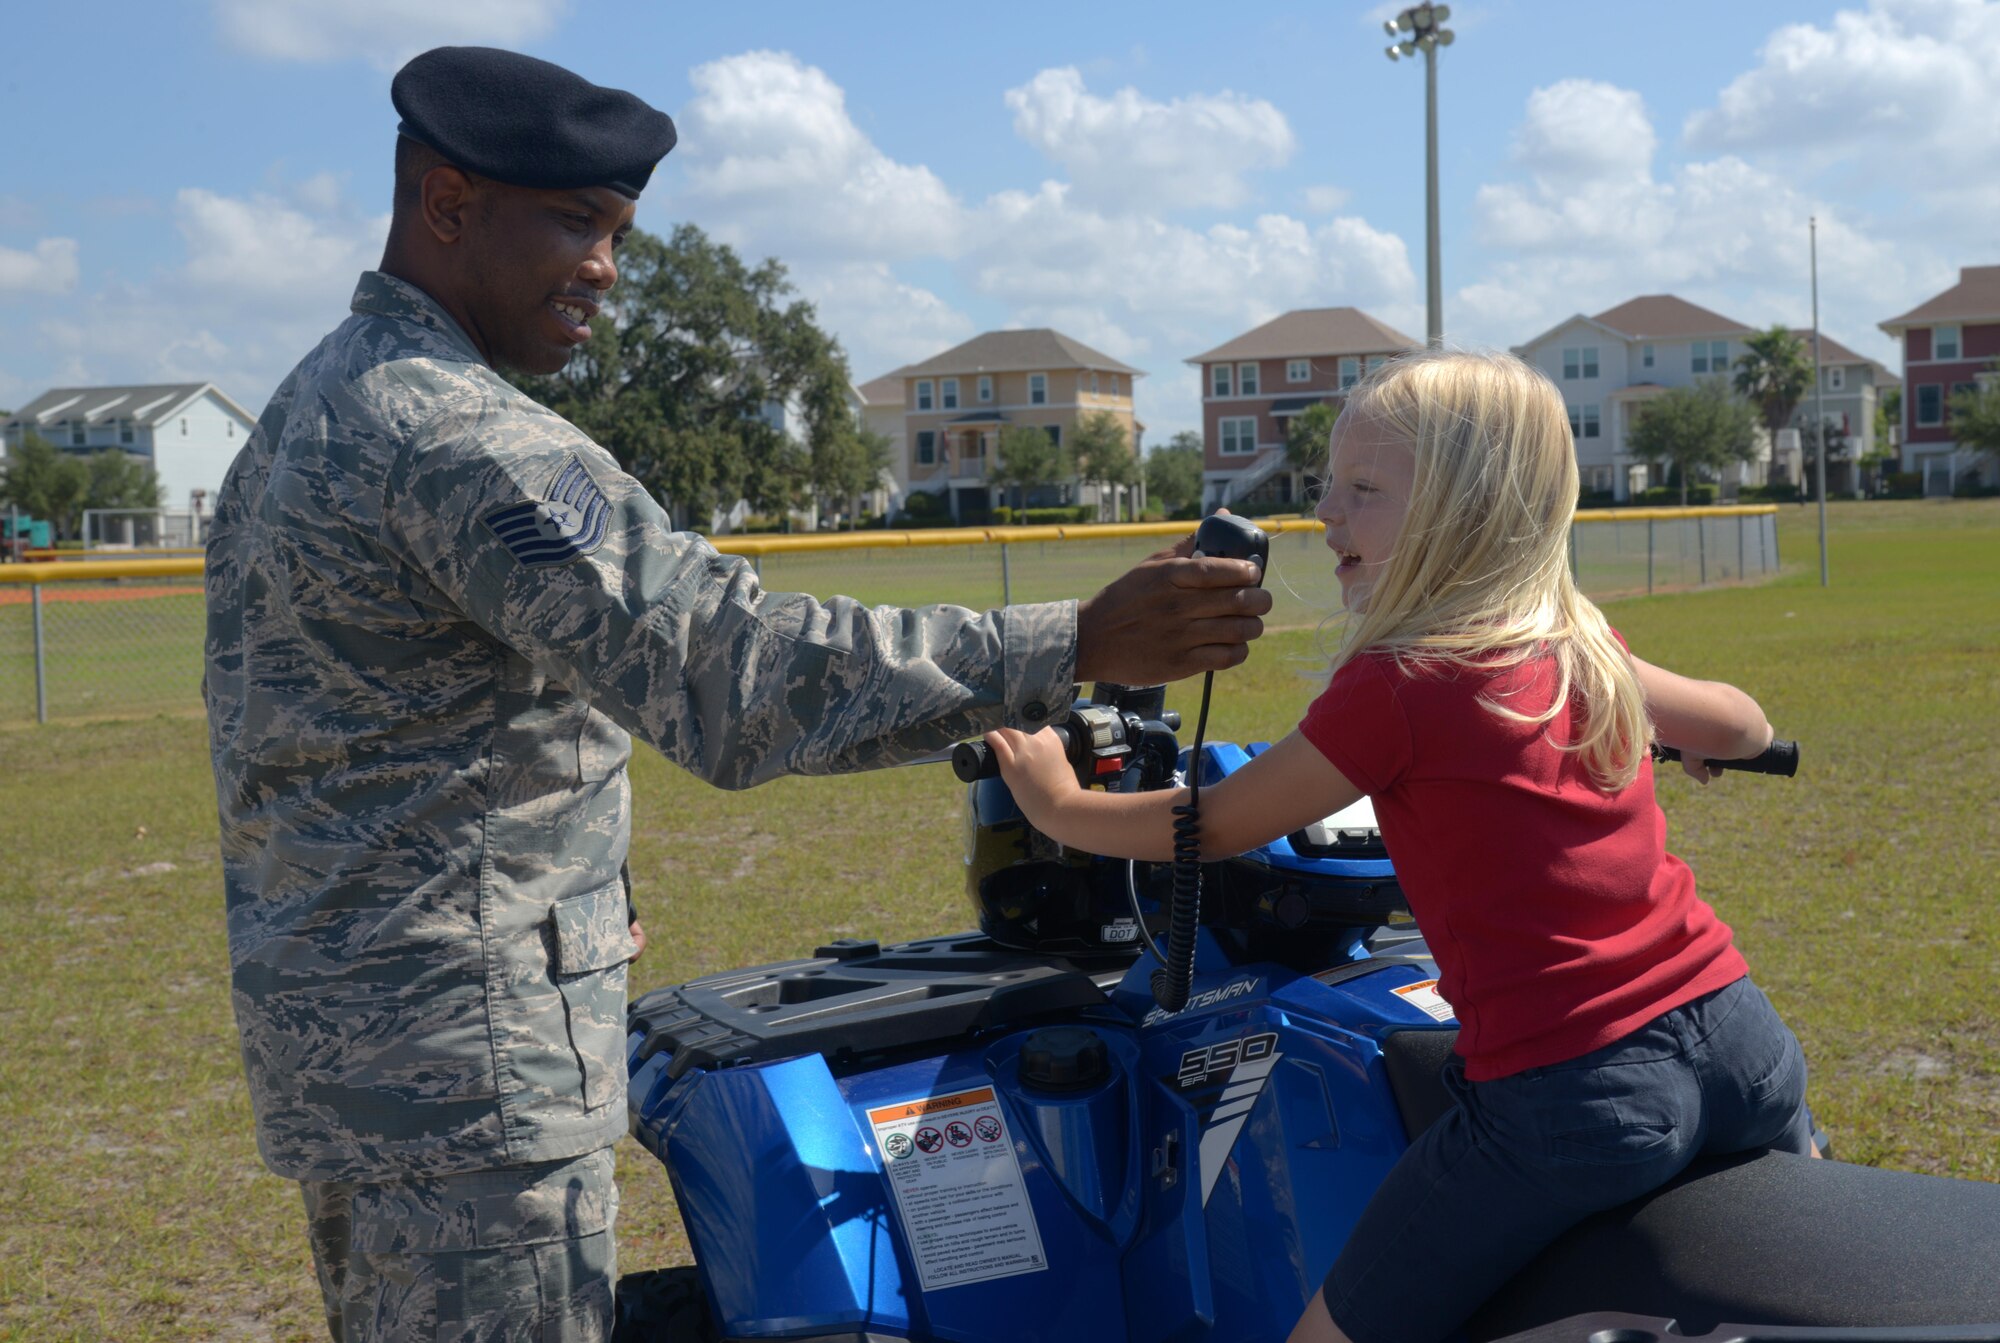 U.S. Air Force Tech. Sgt. Byron Taylor, NCO in charge of supply assigned to the 6th Security Forces Squadron (SFS), shows a student from Tinker Elementary School how to use the radio and lights of an all-terrain vehicle at MacDill Air Force Base, Fla., May 16, 2017. MacDill celebrated National Police Week with several events to commemorate the contributions and sacrifices of law enforcement officials around the world. (U.S. Air Force photo by Senior Airman Tori Long)